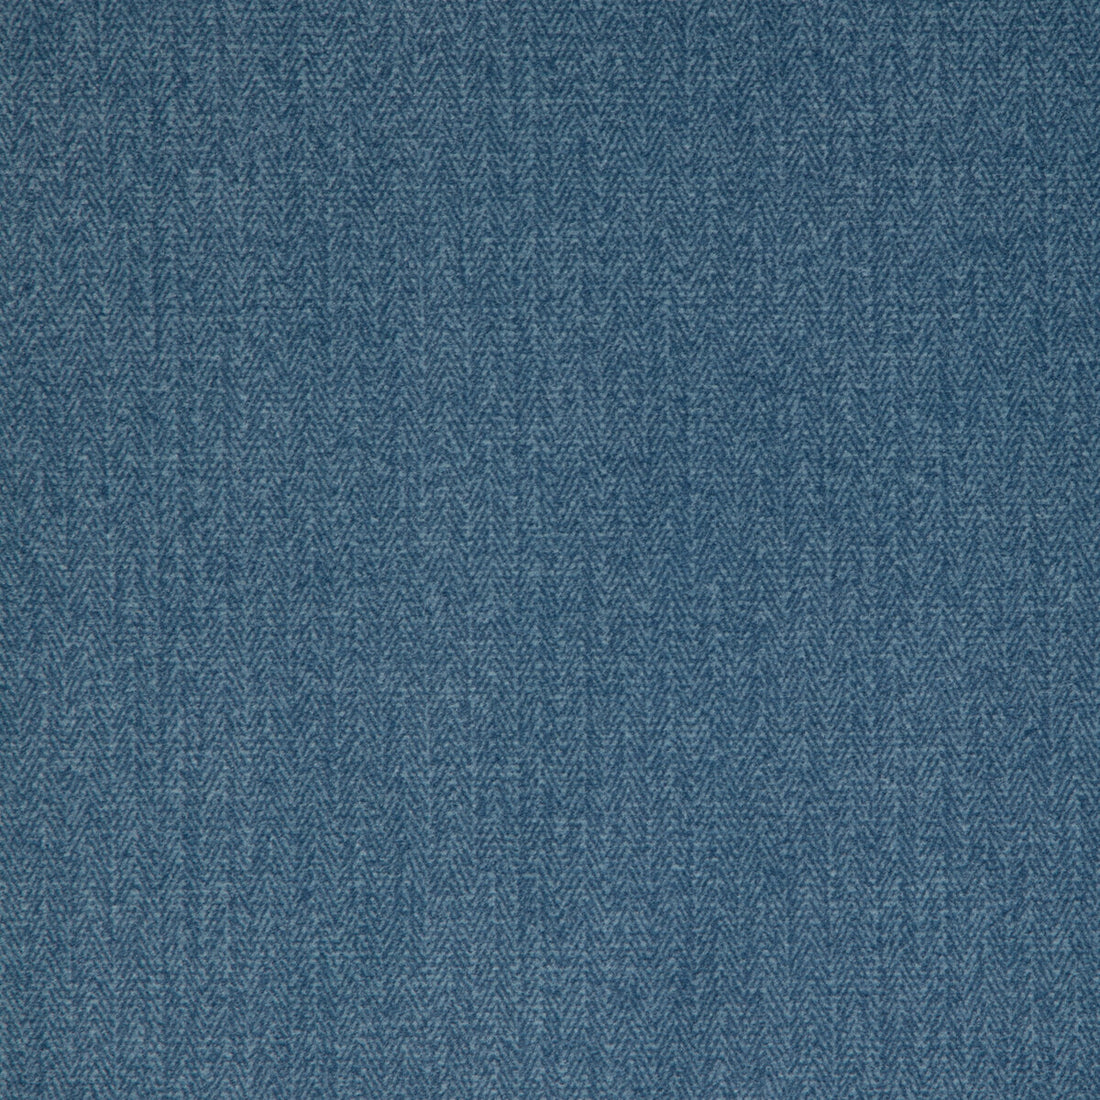 Chevron fabric in denim color - pattern CHEVRON.5.0 - by Kravet Design in the Performance collection